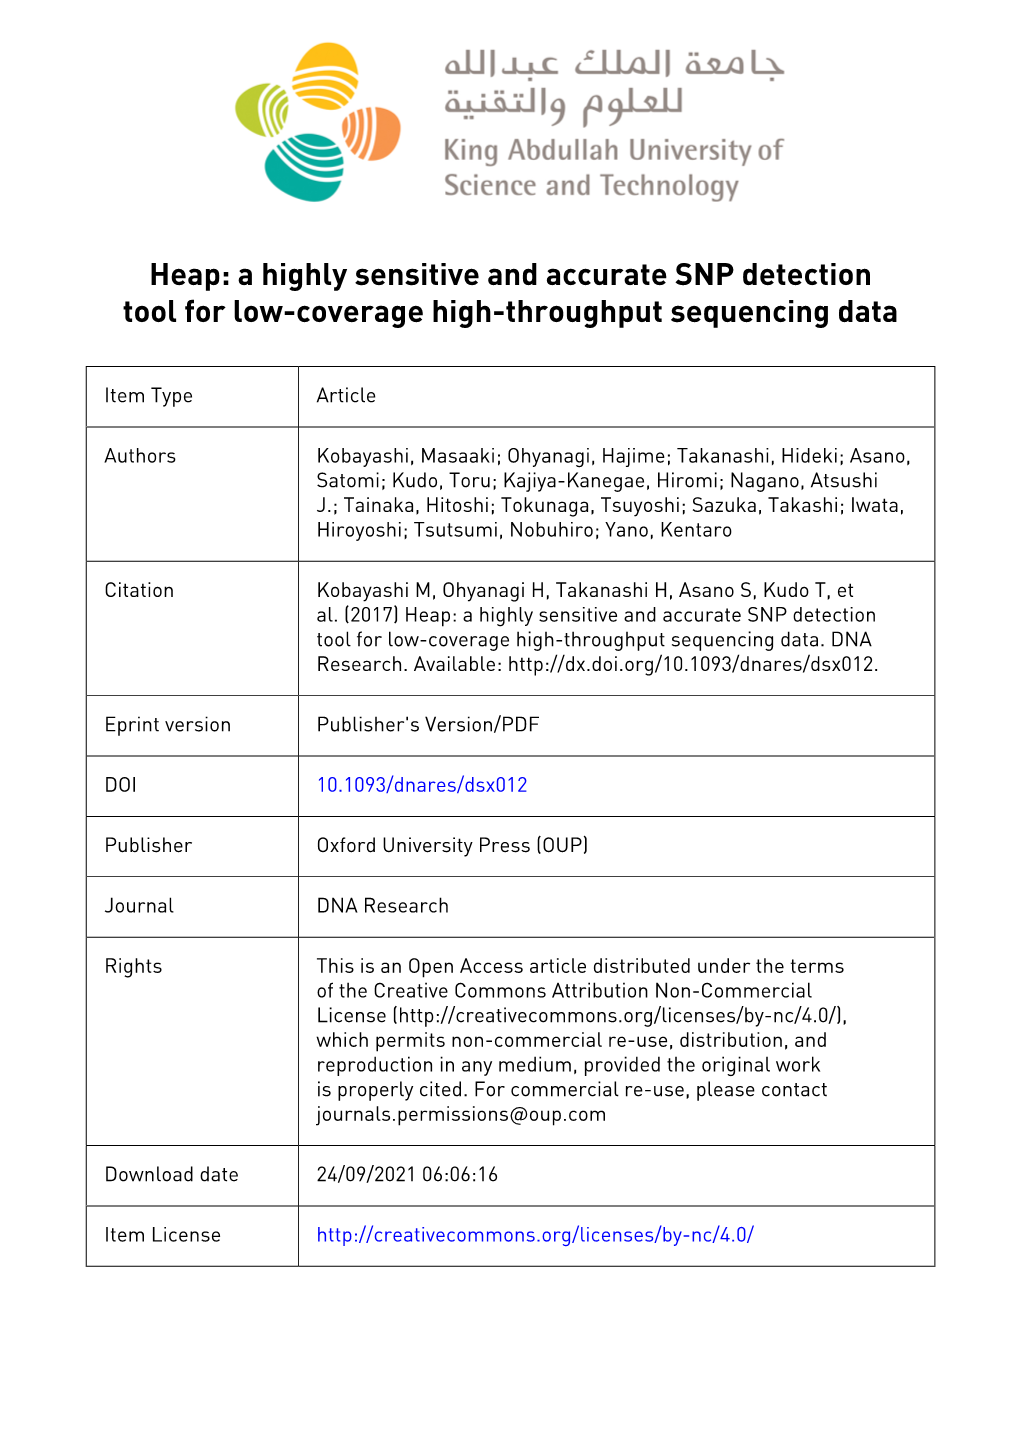 Heap: a Highly Sensitive and Accurate SNP Detection Tool for Low-Coverage High-Throughput Sequencing Data